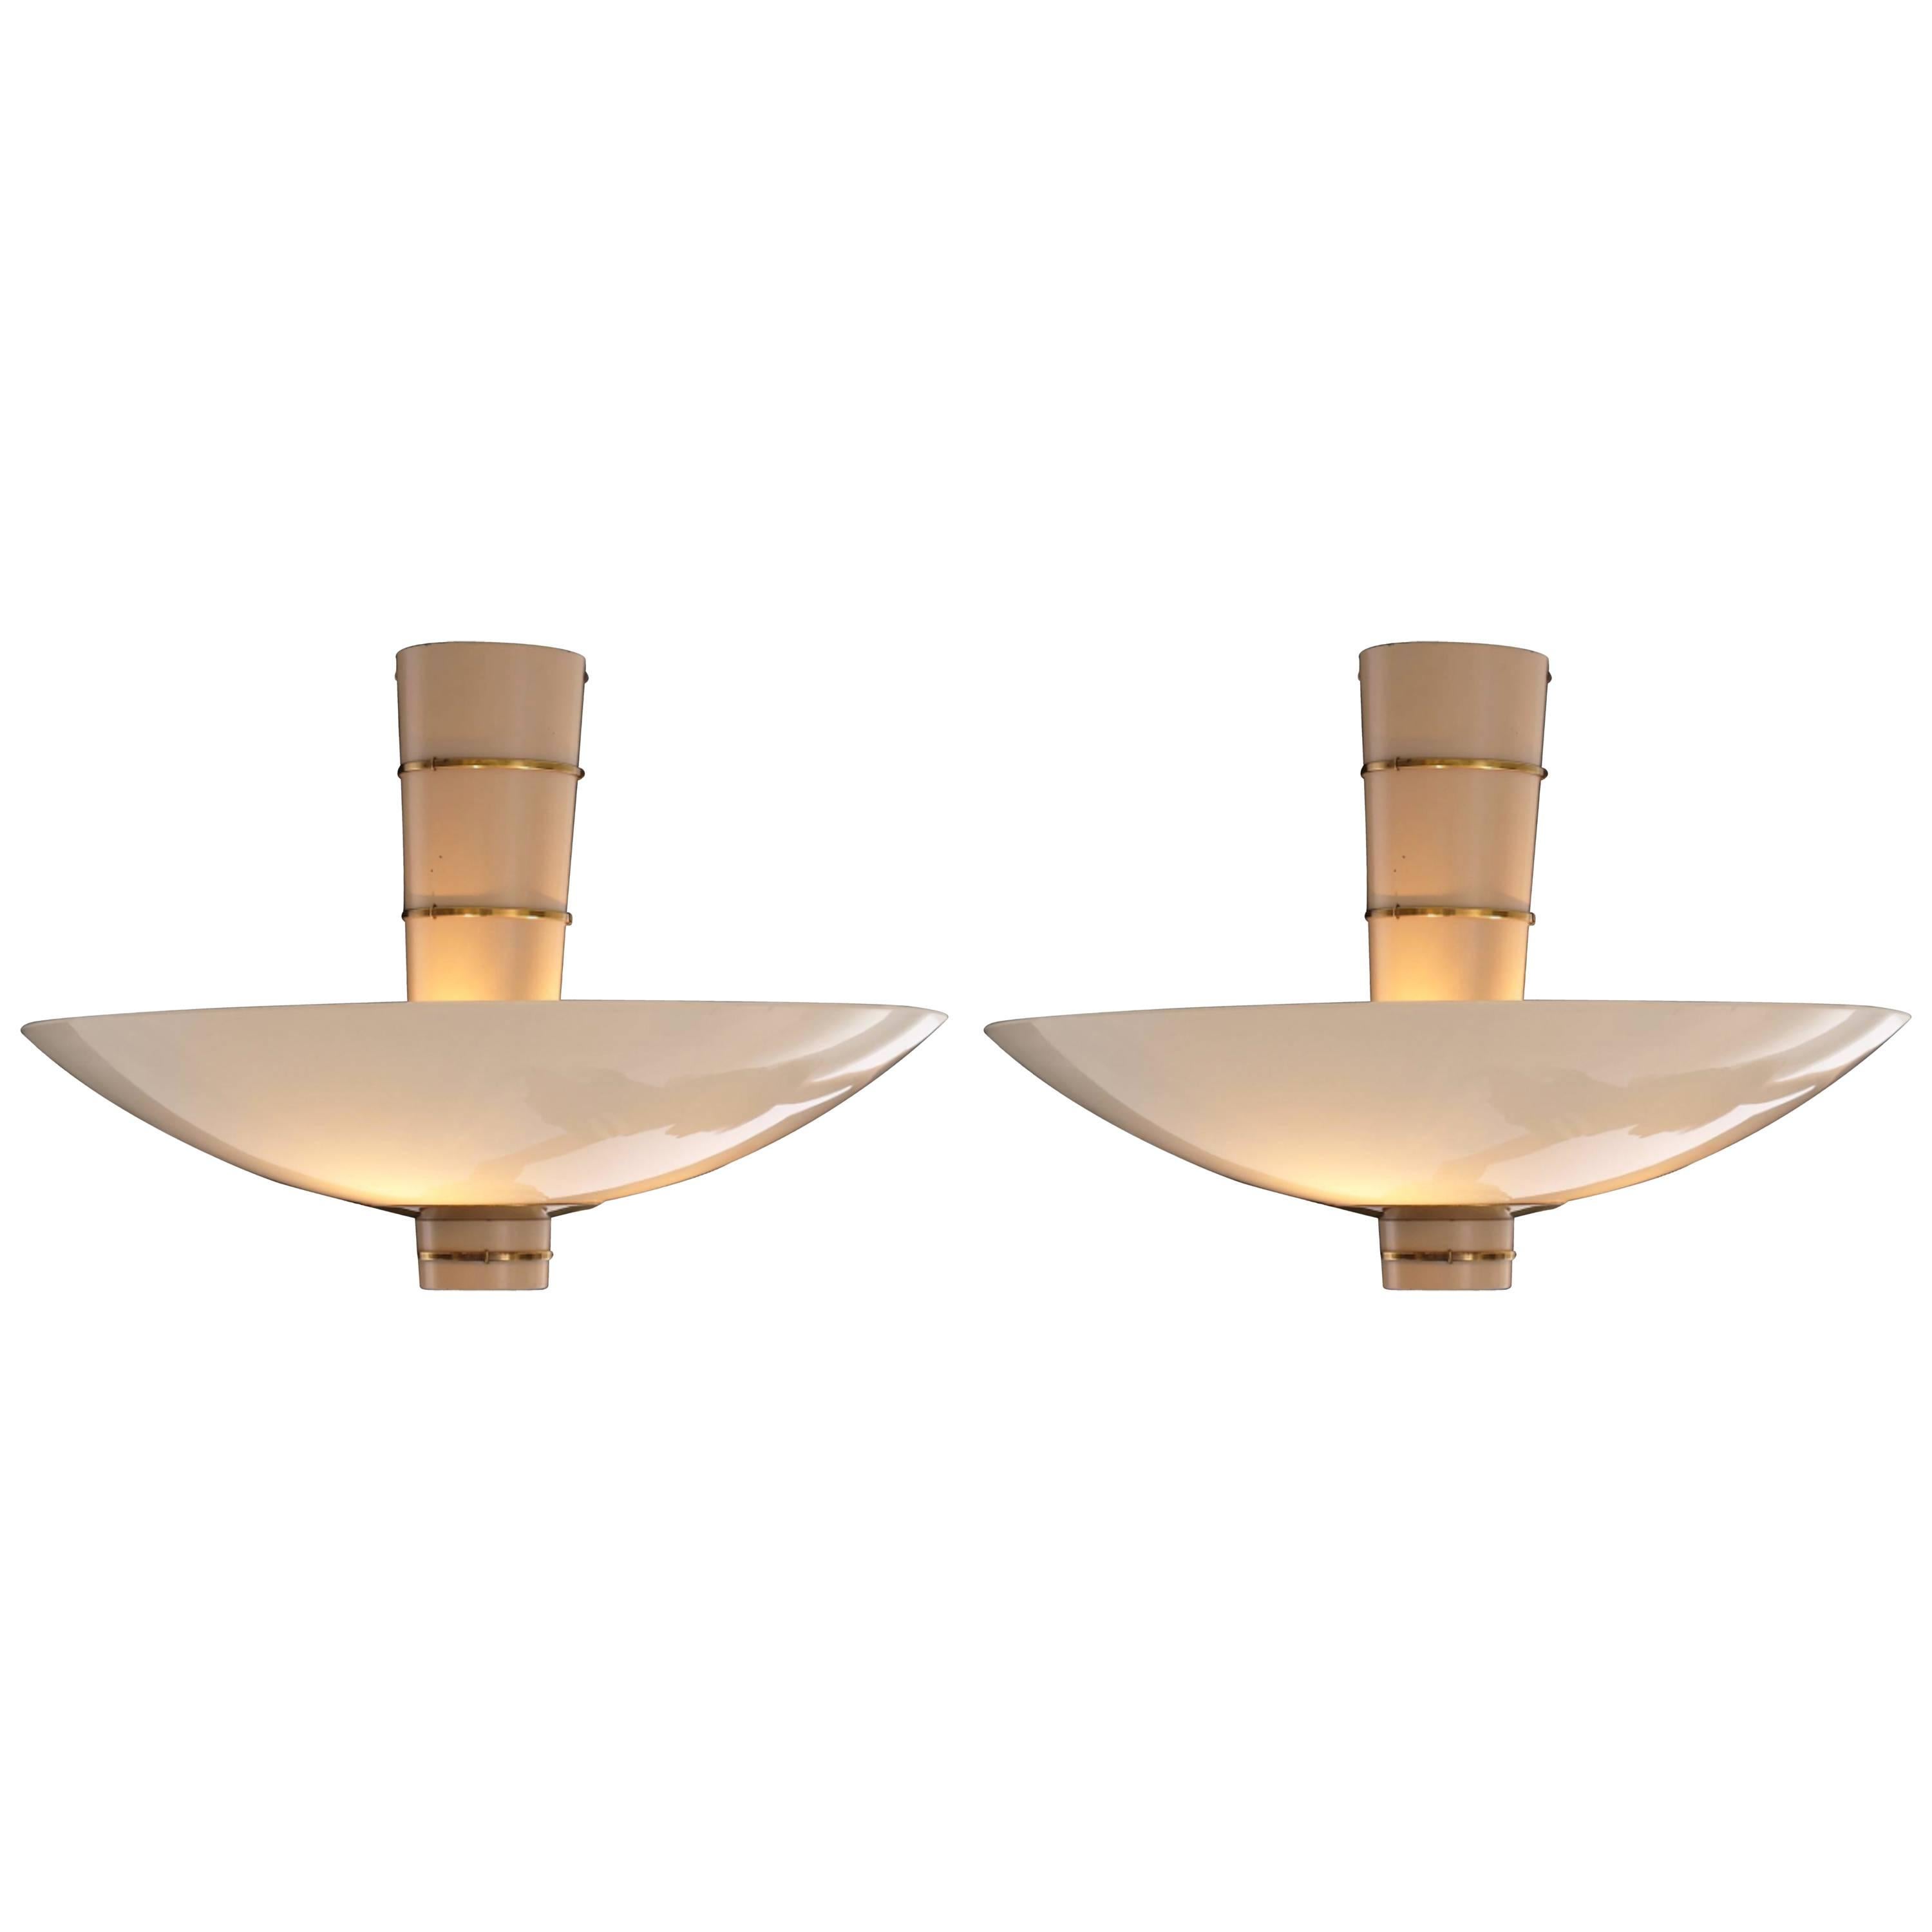 Paavo Tynell Pair of Ceiling Lamps Model 9055 for Taito Oy, 1940